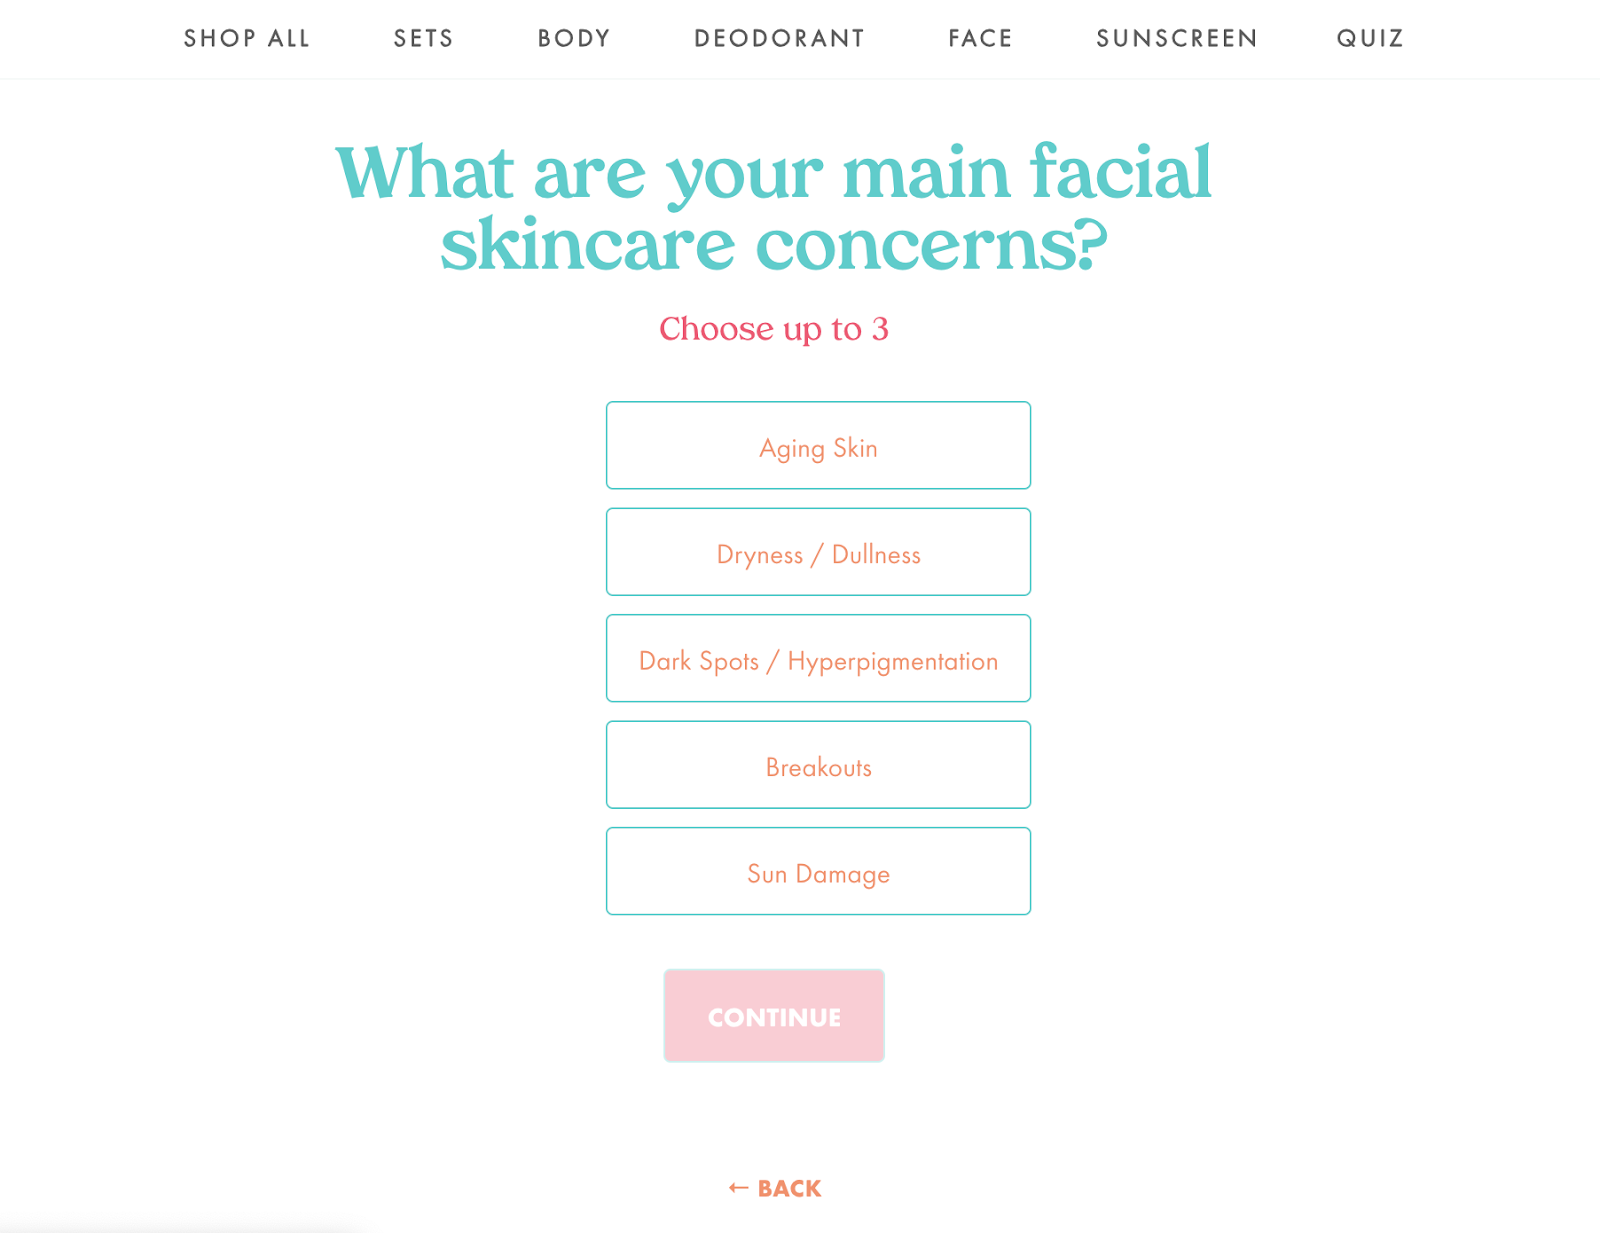 Kopari Beauty quiz asking about preferences and skin concerns and suggesting the best products based off the answers.